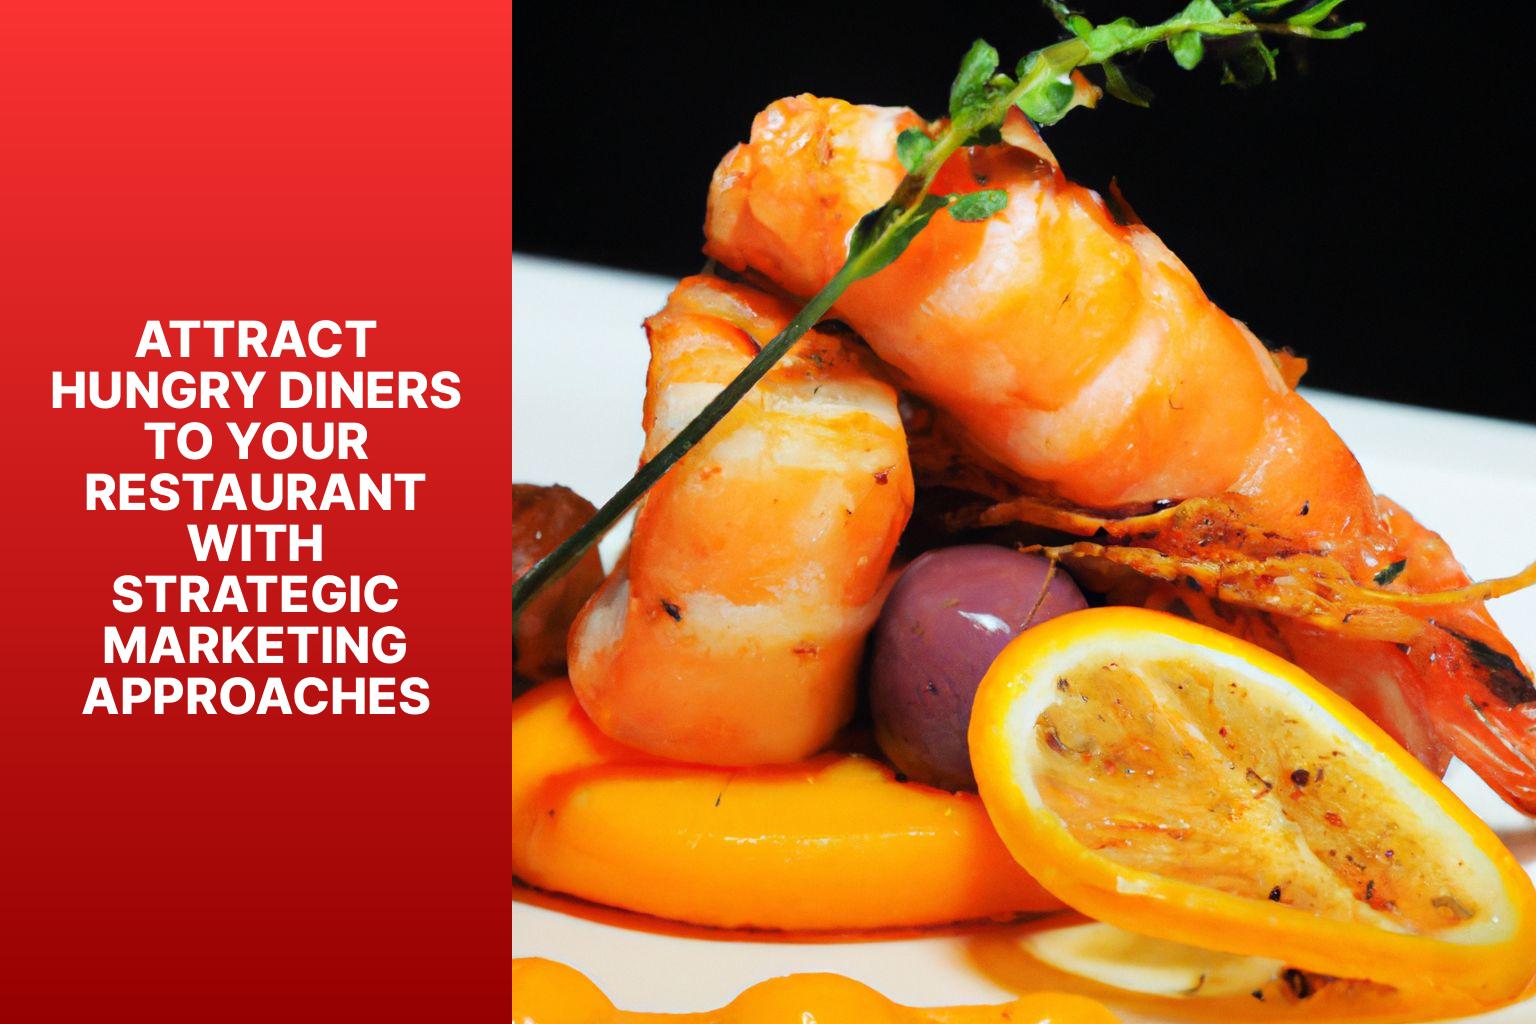 Attract Hungry Diners to Your Restaurant with Strategic Marketing Approaches